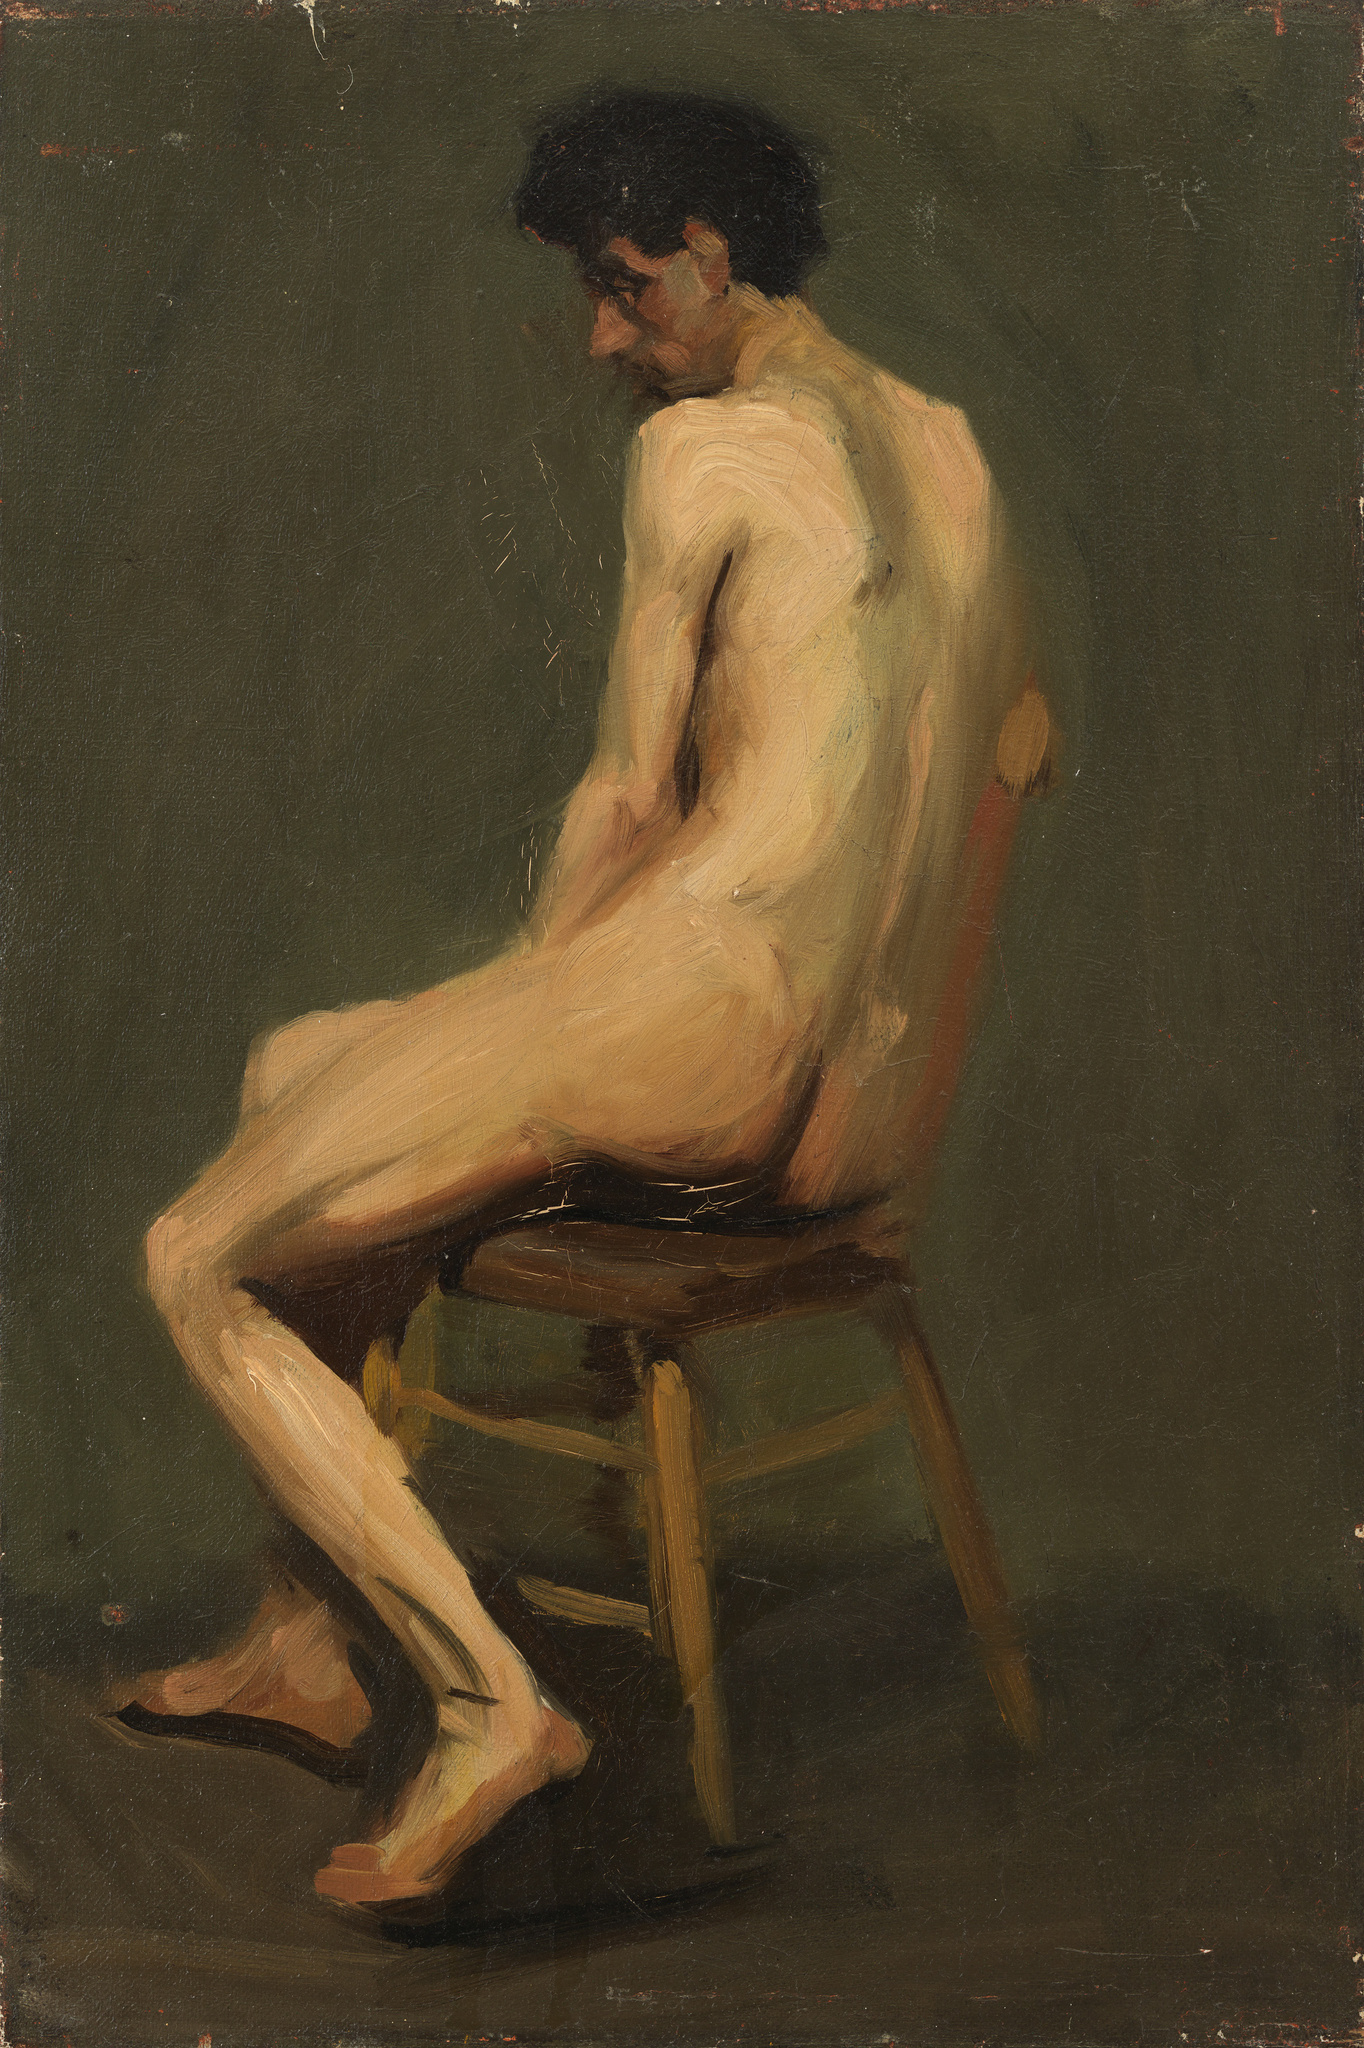 A nude male with curly black hair sits in a wooden chair, his body turned slight away from us